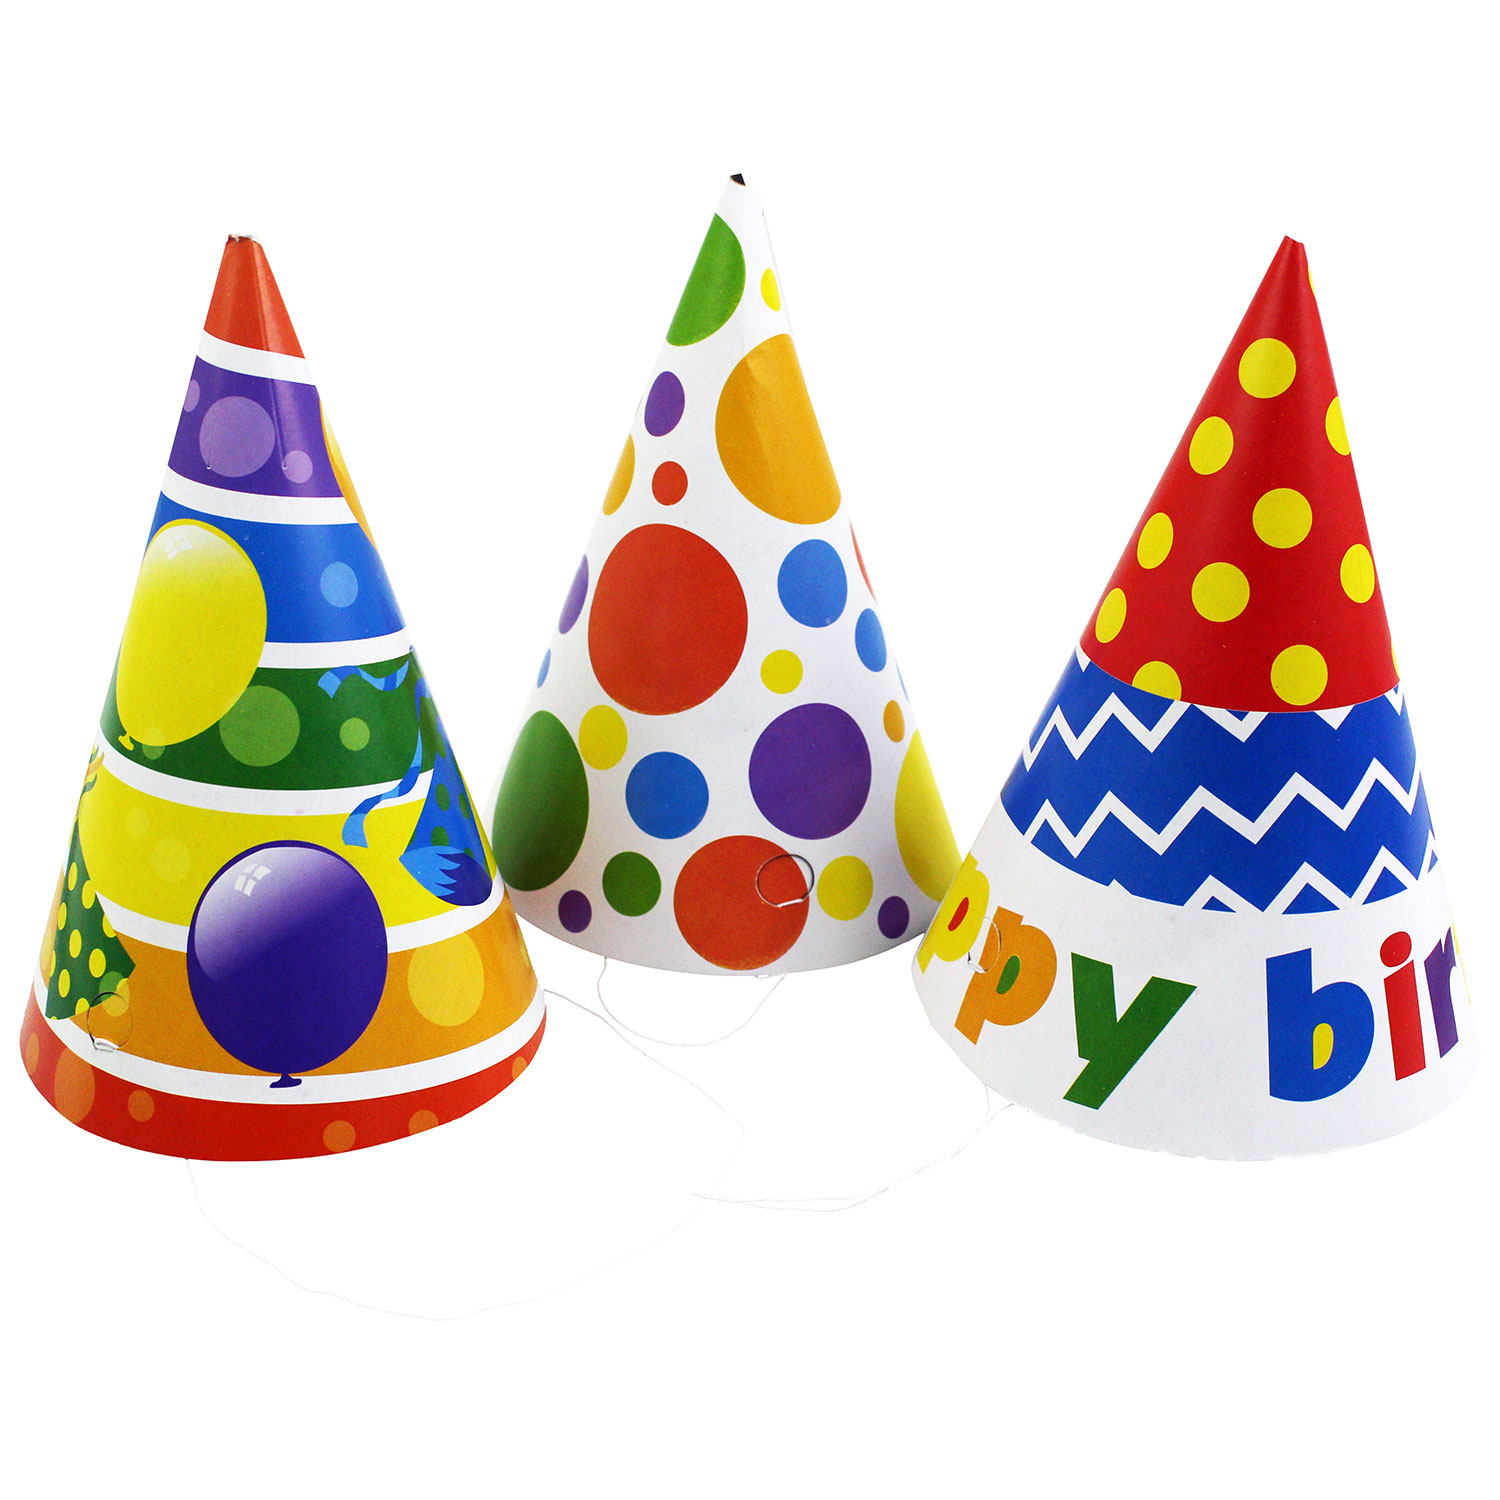 Blue Party Hats Clearance Buy, Save 65% | jlcatj.gob.mx